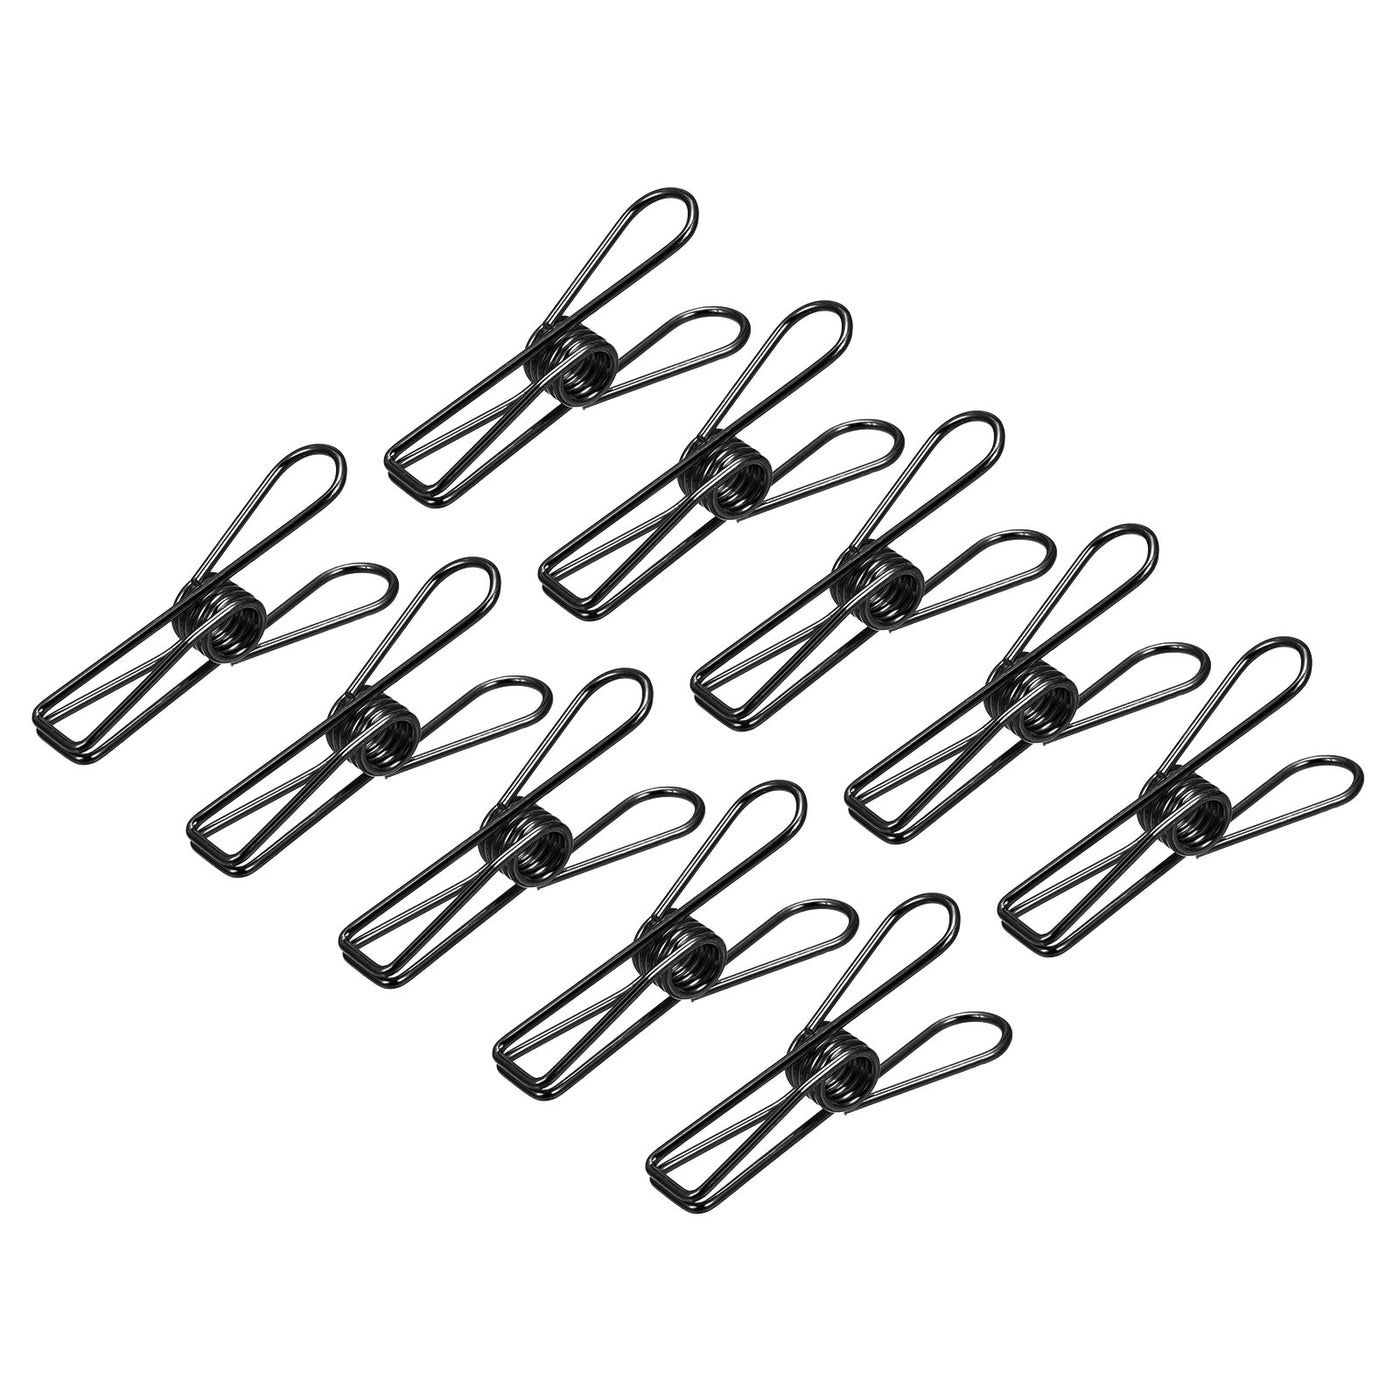 uxcell Uxcell Tablecloth Clips, 55mm Carbon Steel Clamps for Fix Table Cloth, Black 25 Pcs